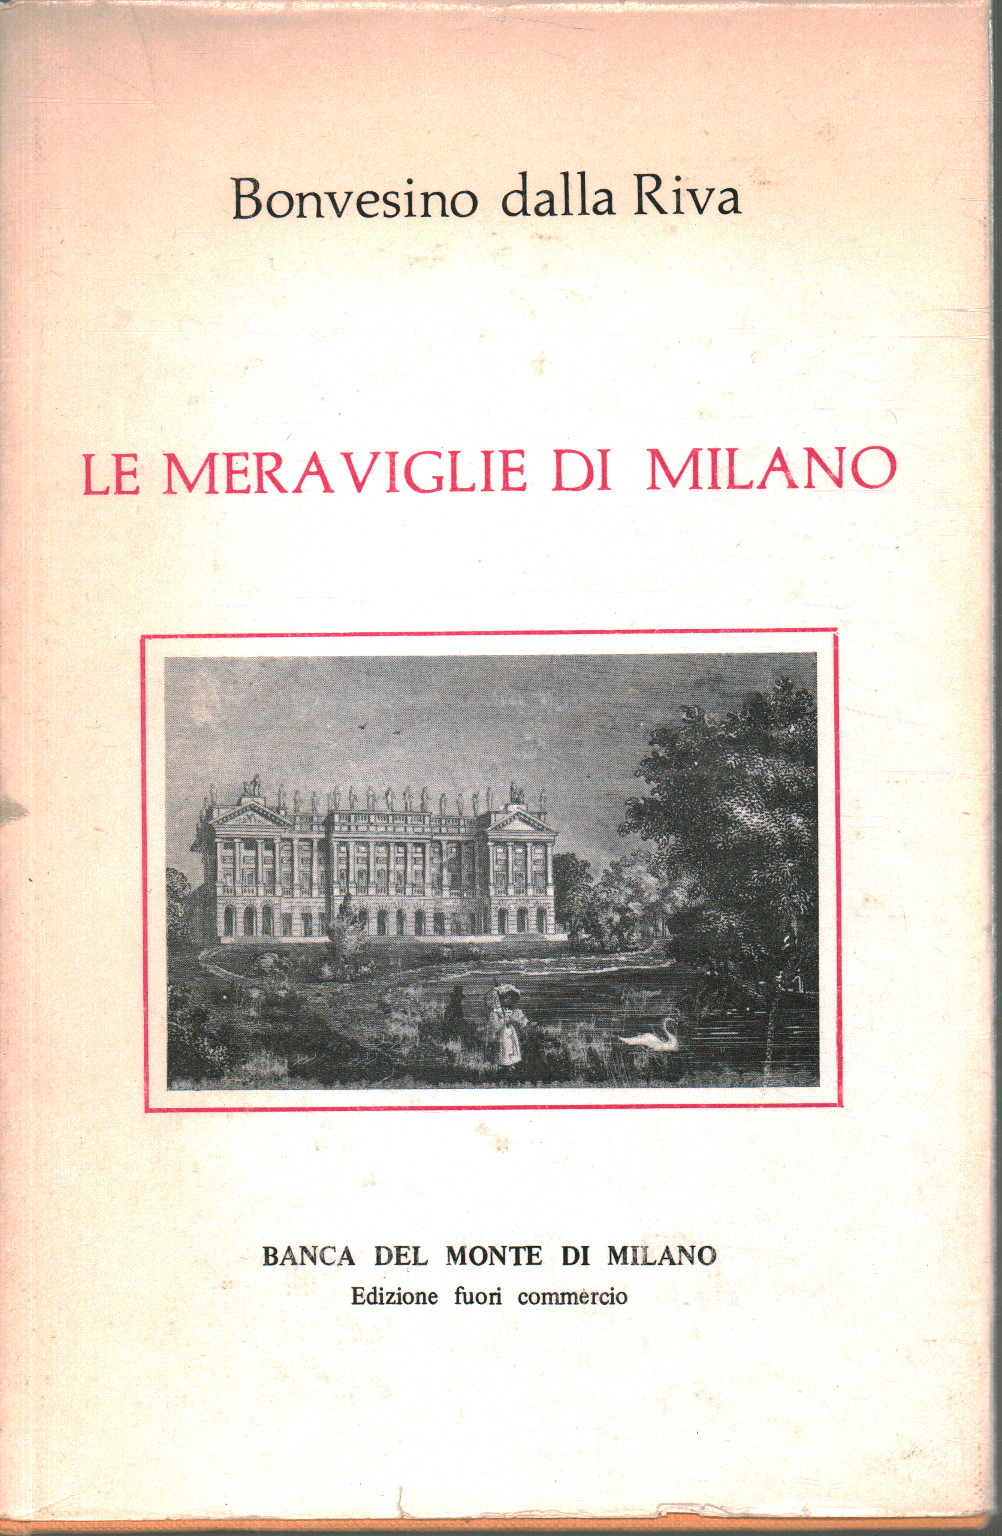 The wonders of Milan, Bonvesino from the Shore